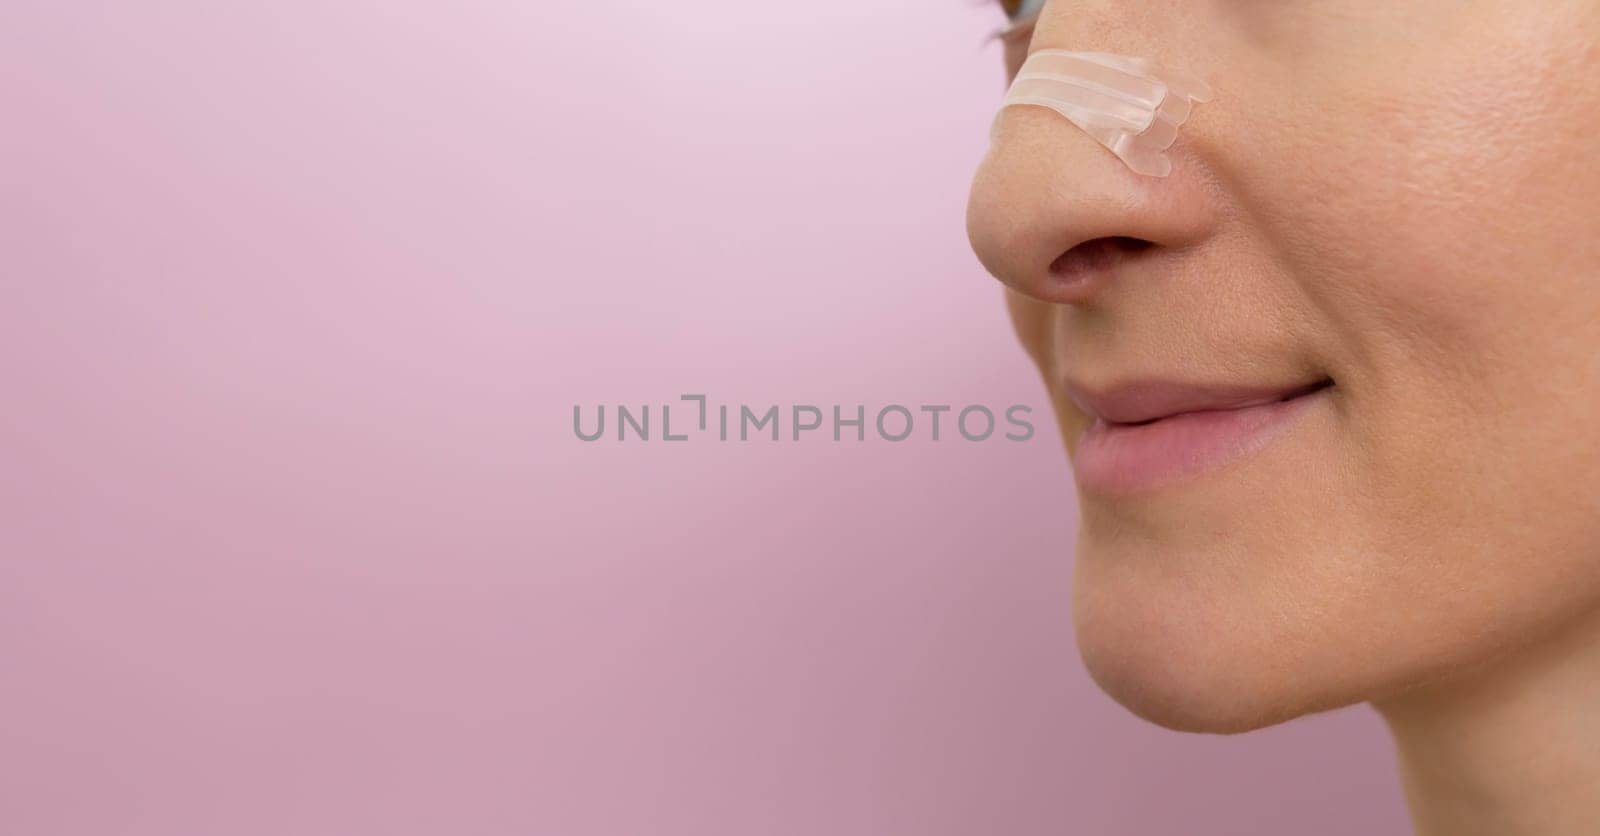 Mockup Closeup Nasal Strip on Female Nose on Pink Background. Stop Drug-Free Snoring Solution. Copy Space For Text. Adhesive Bandage for Better Breathing High quality photo